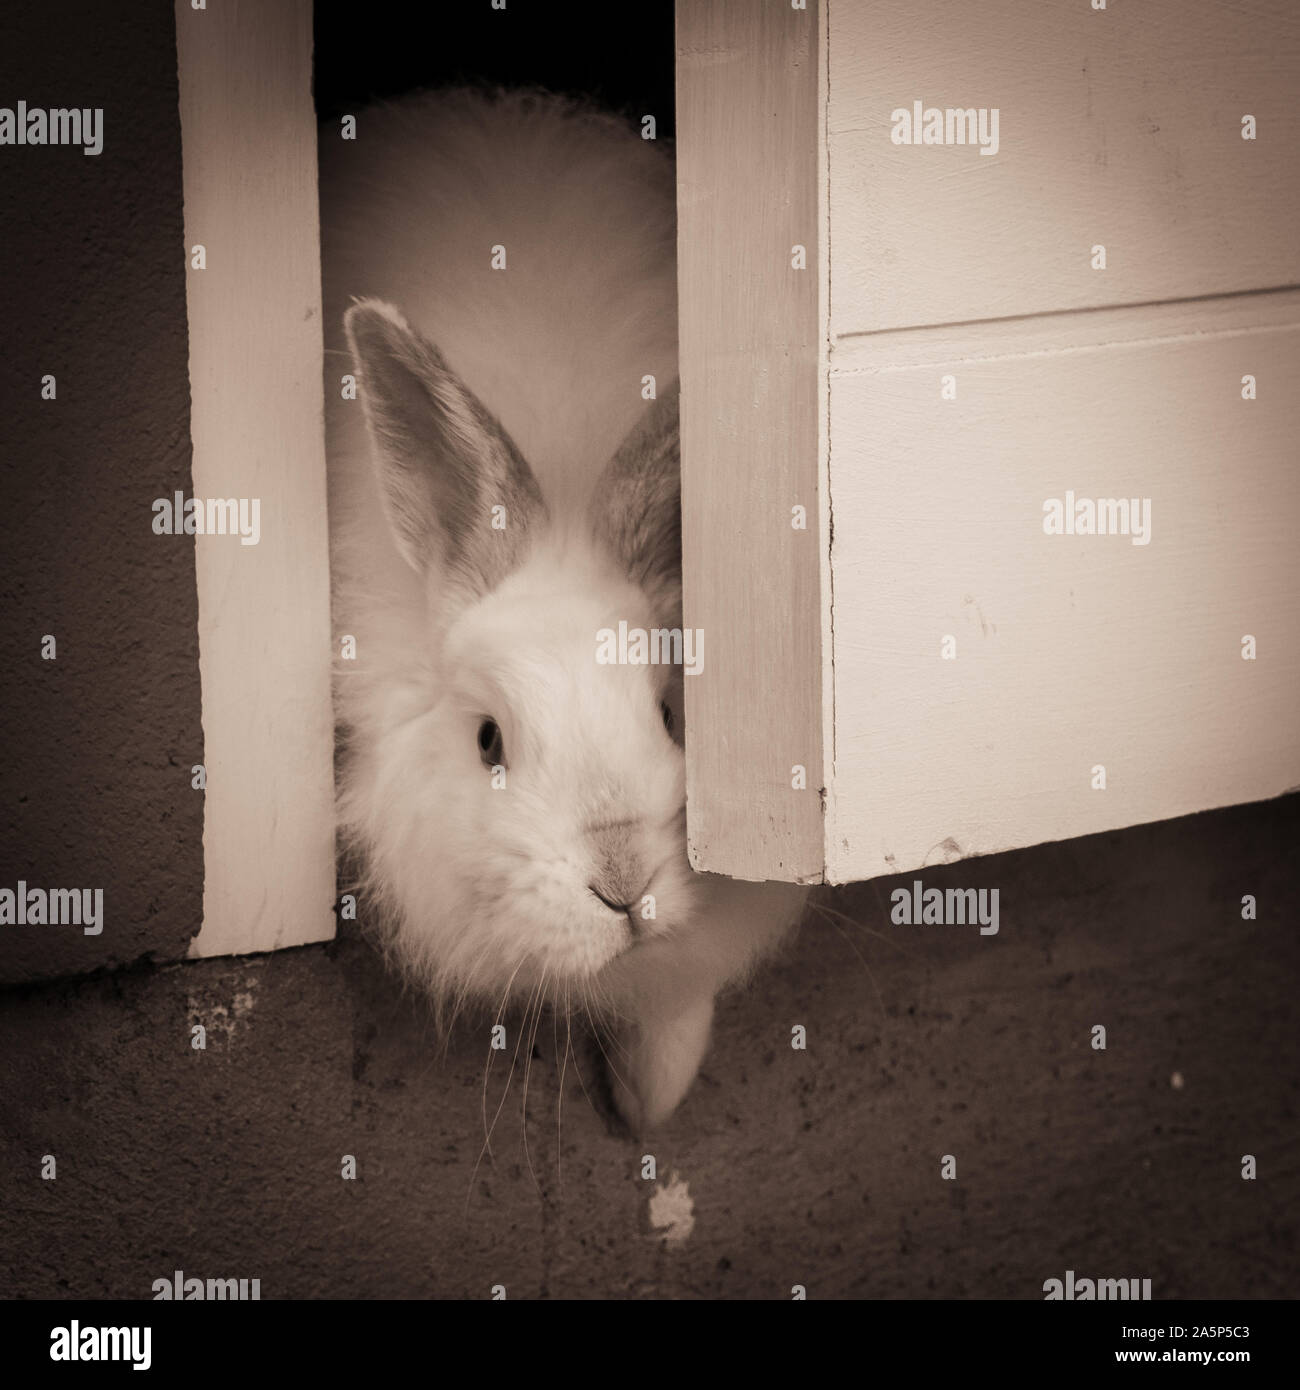 Bunny being curious Stock Photo